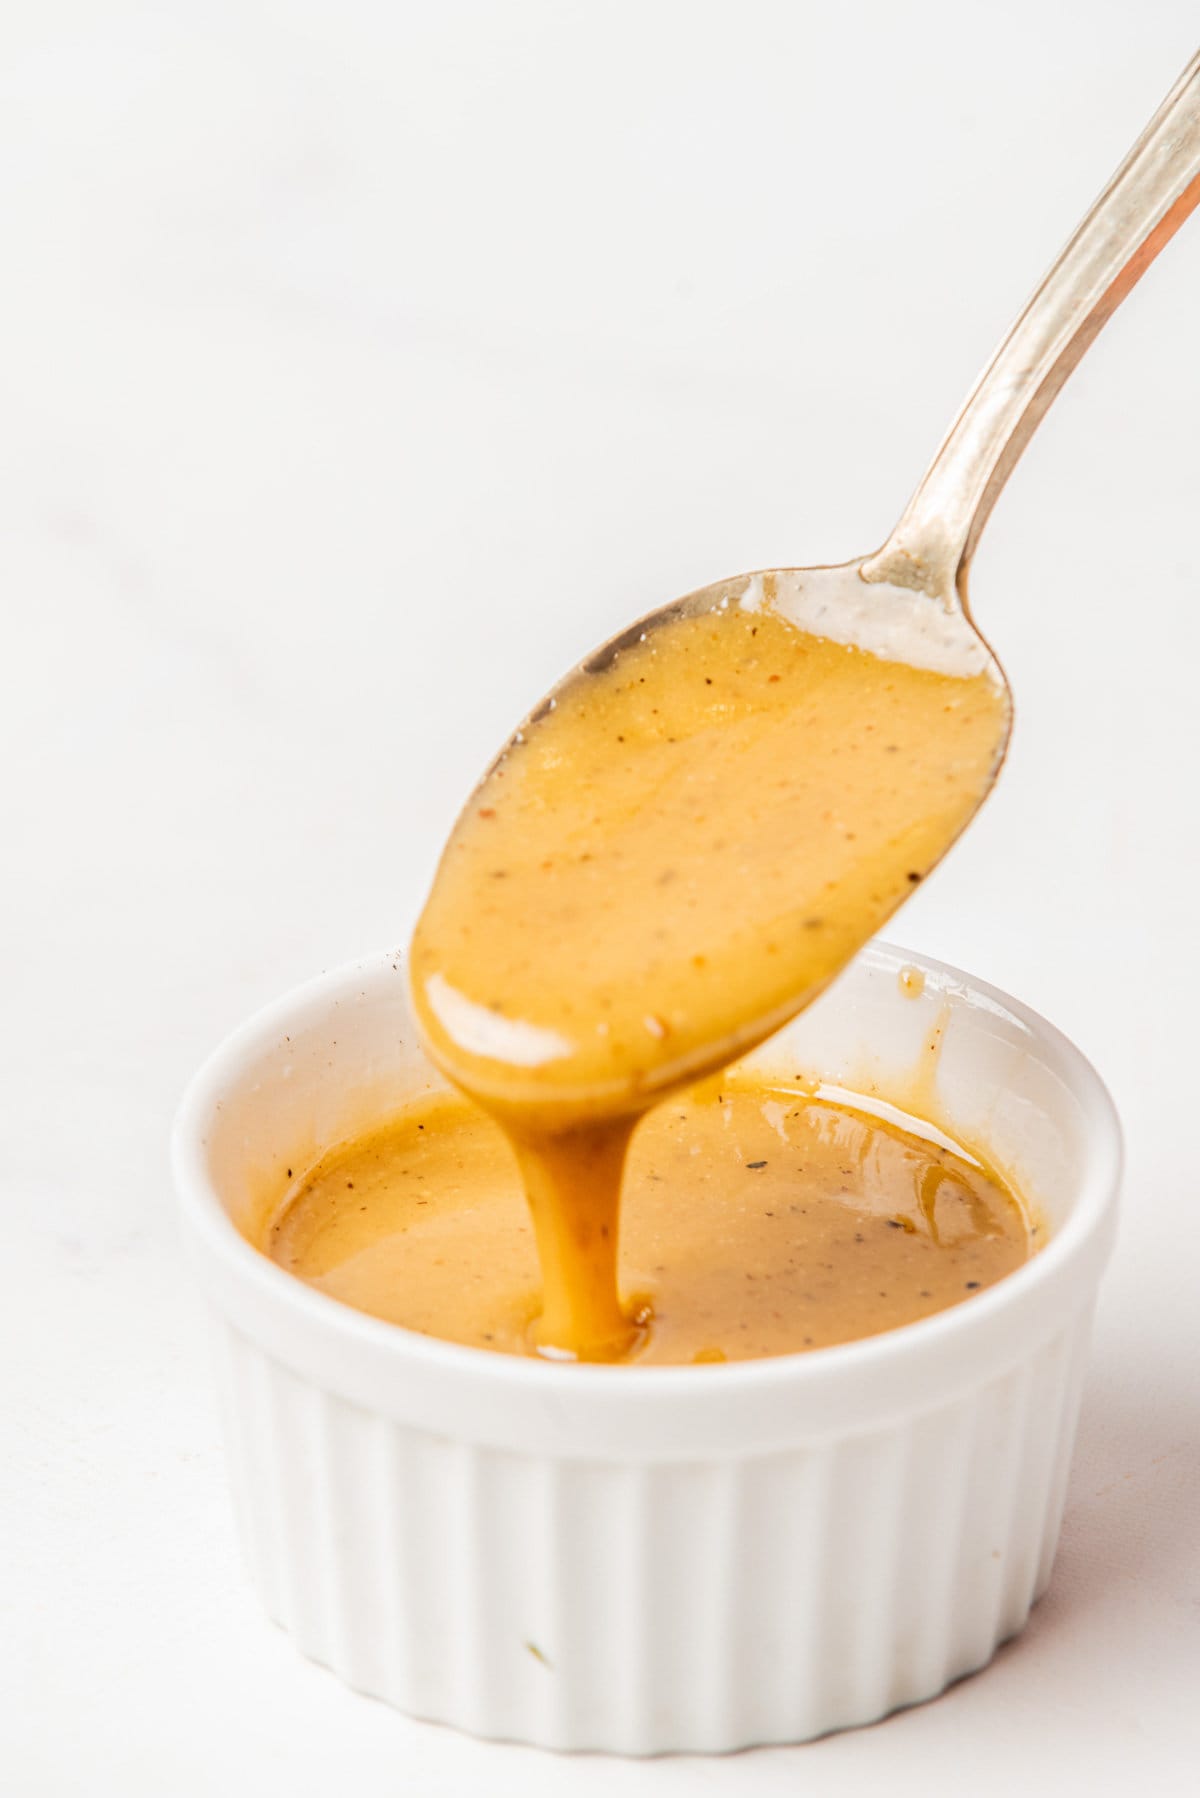 An image of salad dressing in a small bowl with aa spoon scooping a spoonful of dressing.